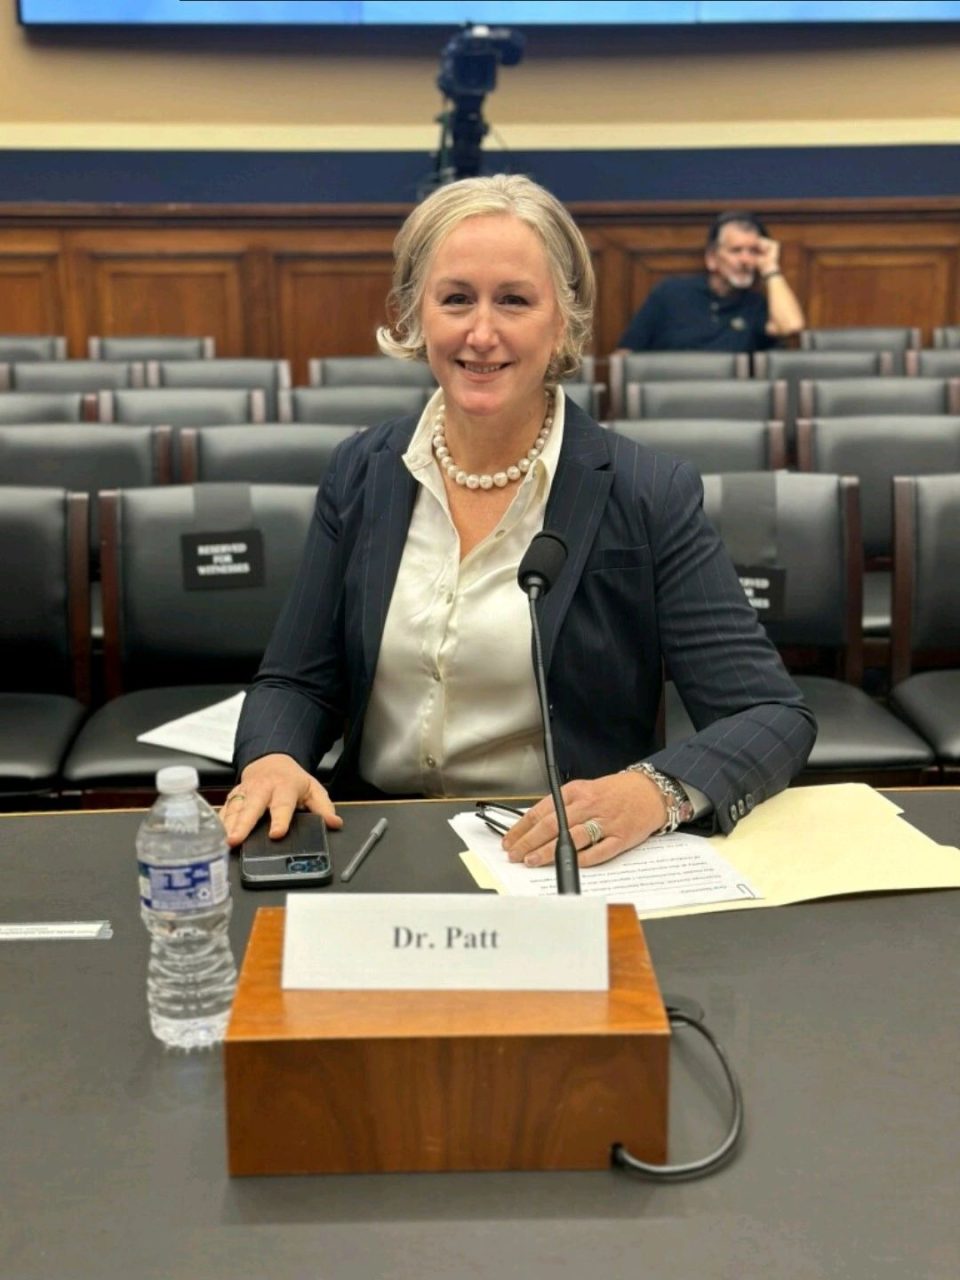 COA Vice President Debra Patt testified in front of the House Energy and Commerce Committee today on improving patient access to care and cutting red tape for doctors